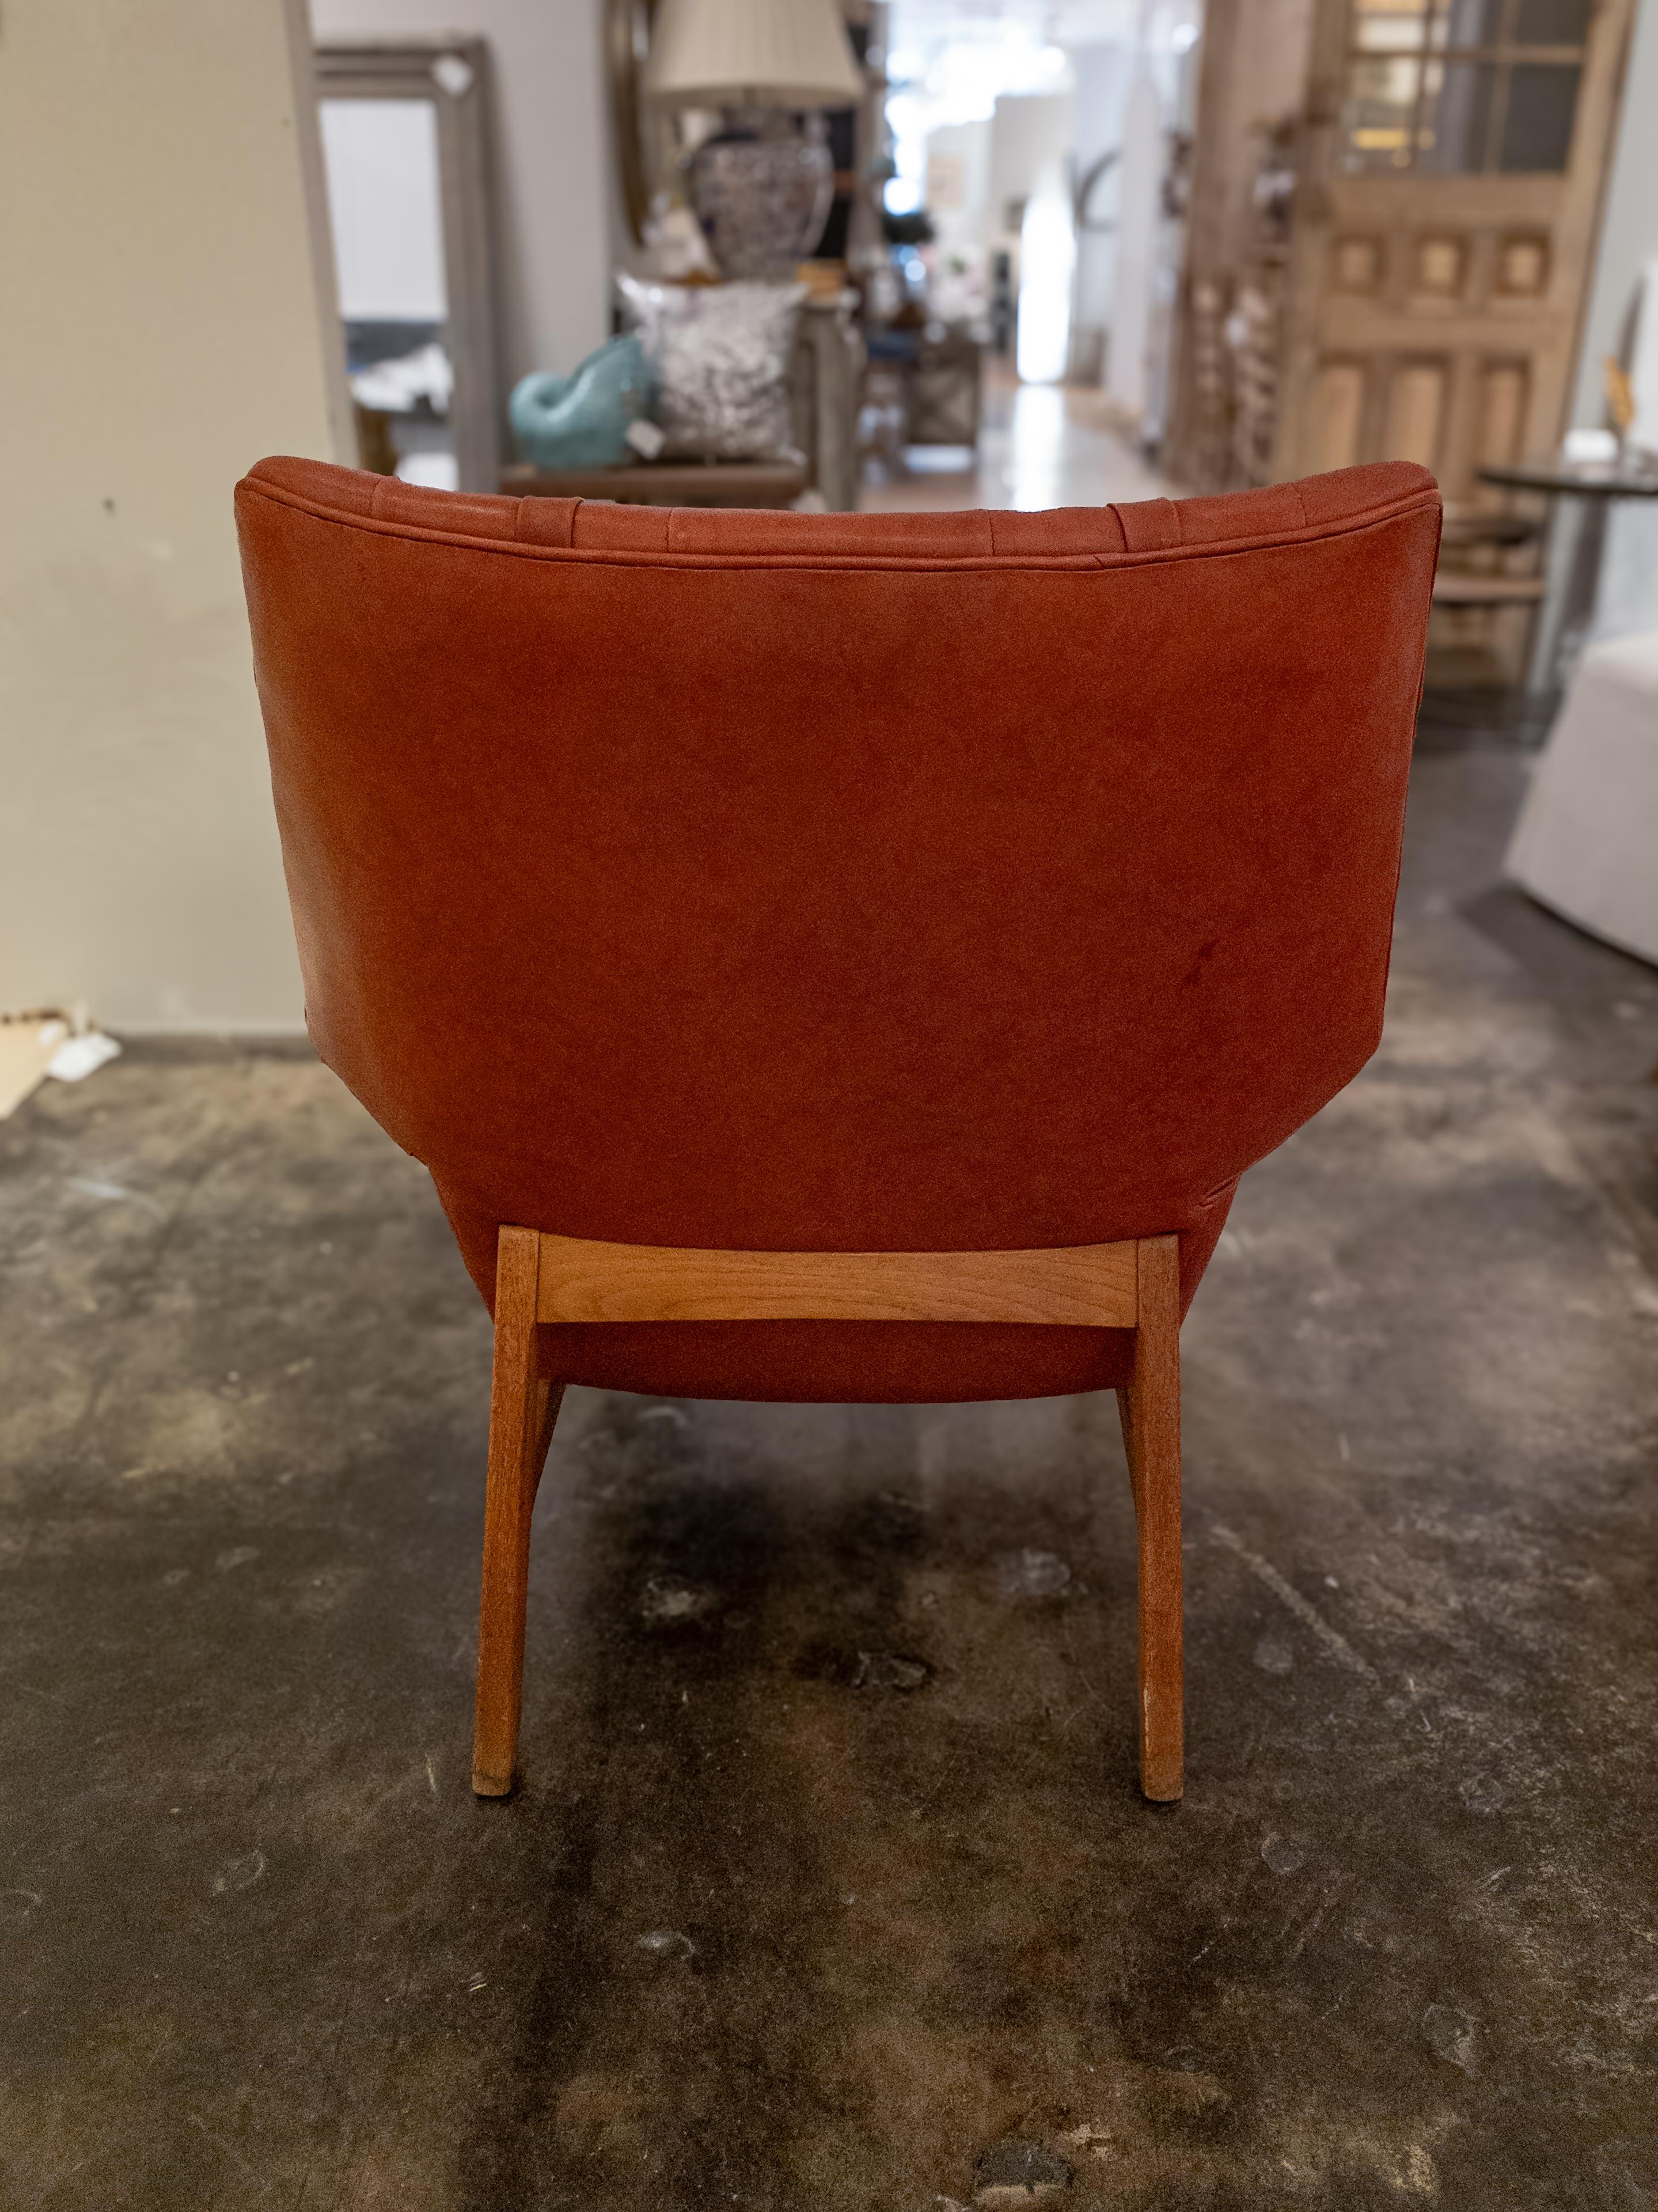 Tove & Edvard Kindt-Larsen Leather Lounge Chair In Good Condition For Sale In Houston, TX